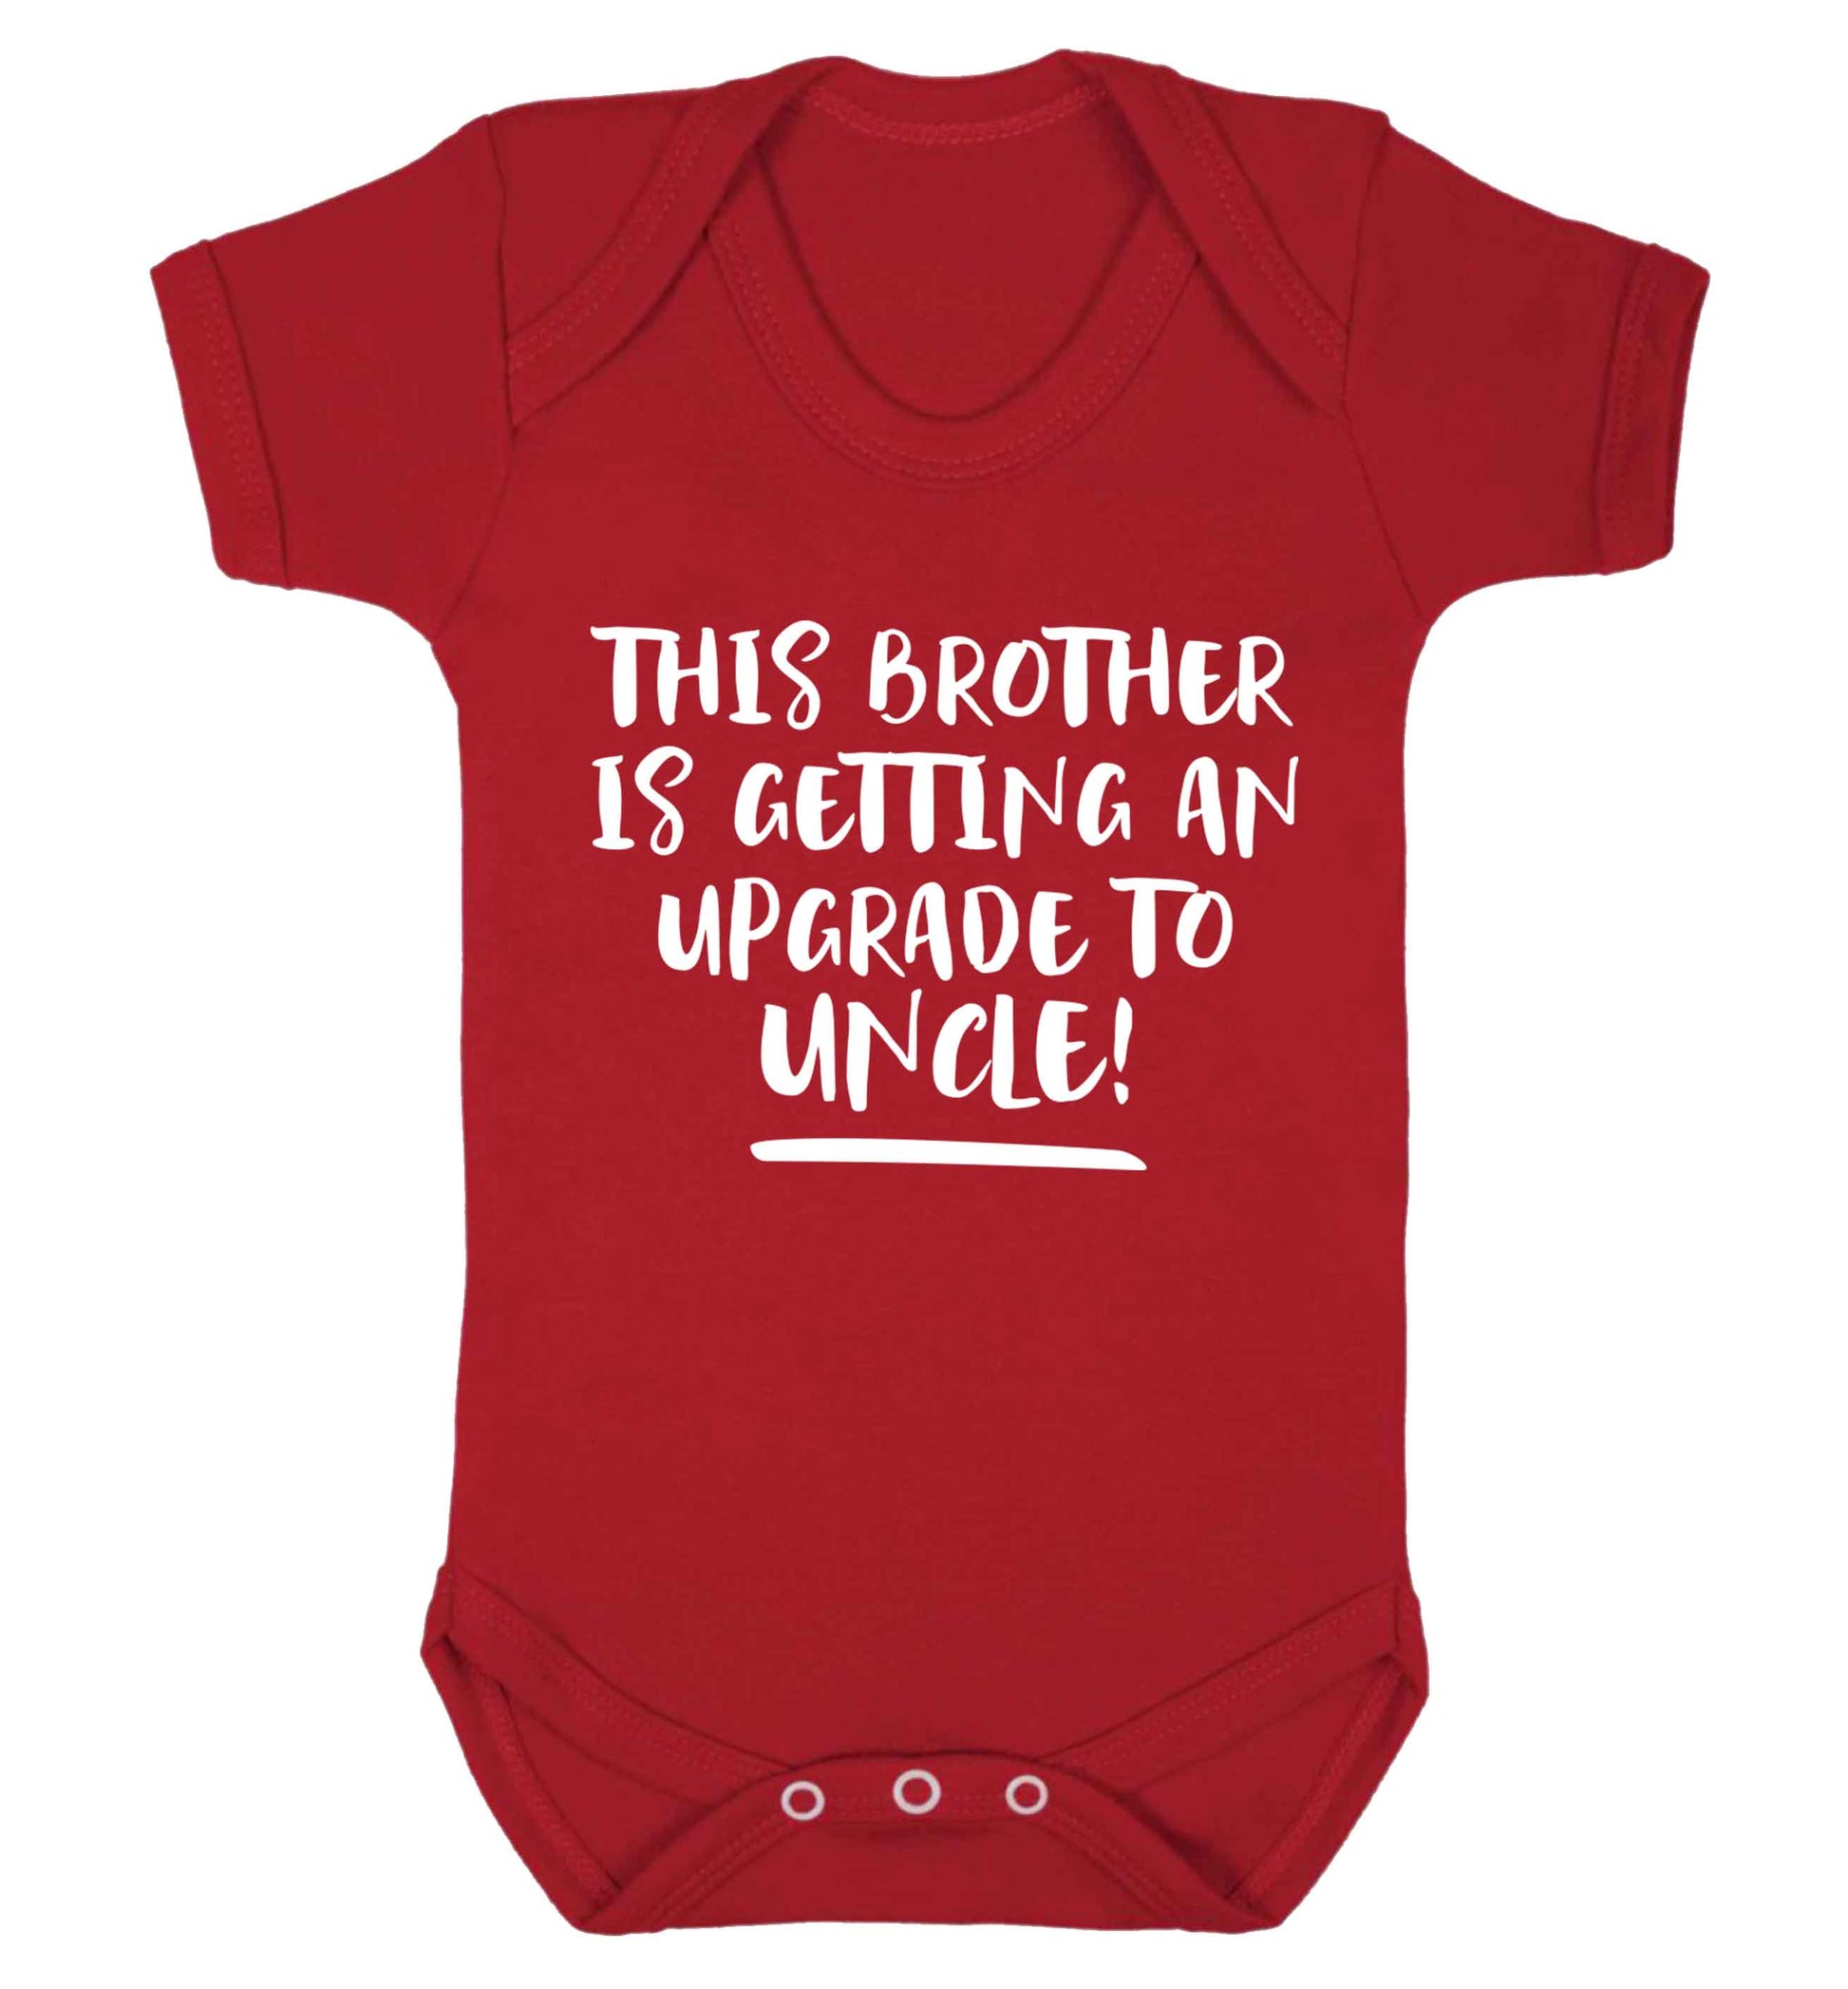 This brother is getting an upgrade to uncle! Baby Vest red 18-24 months